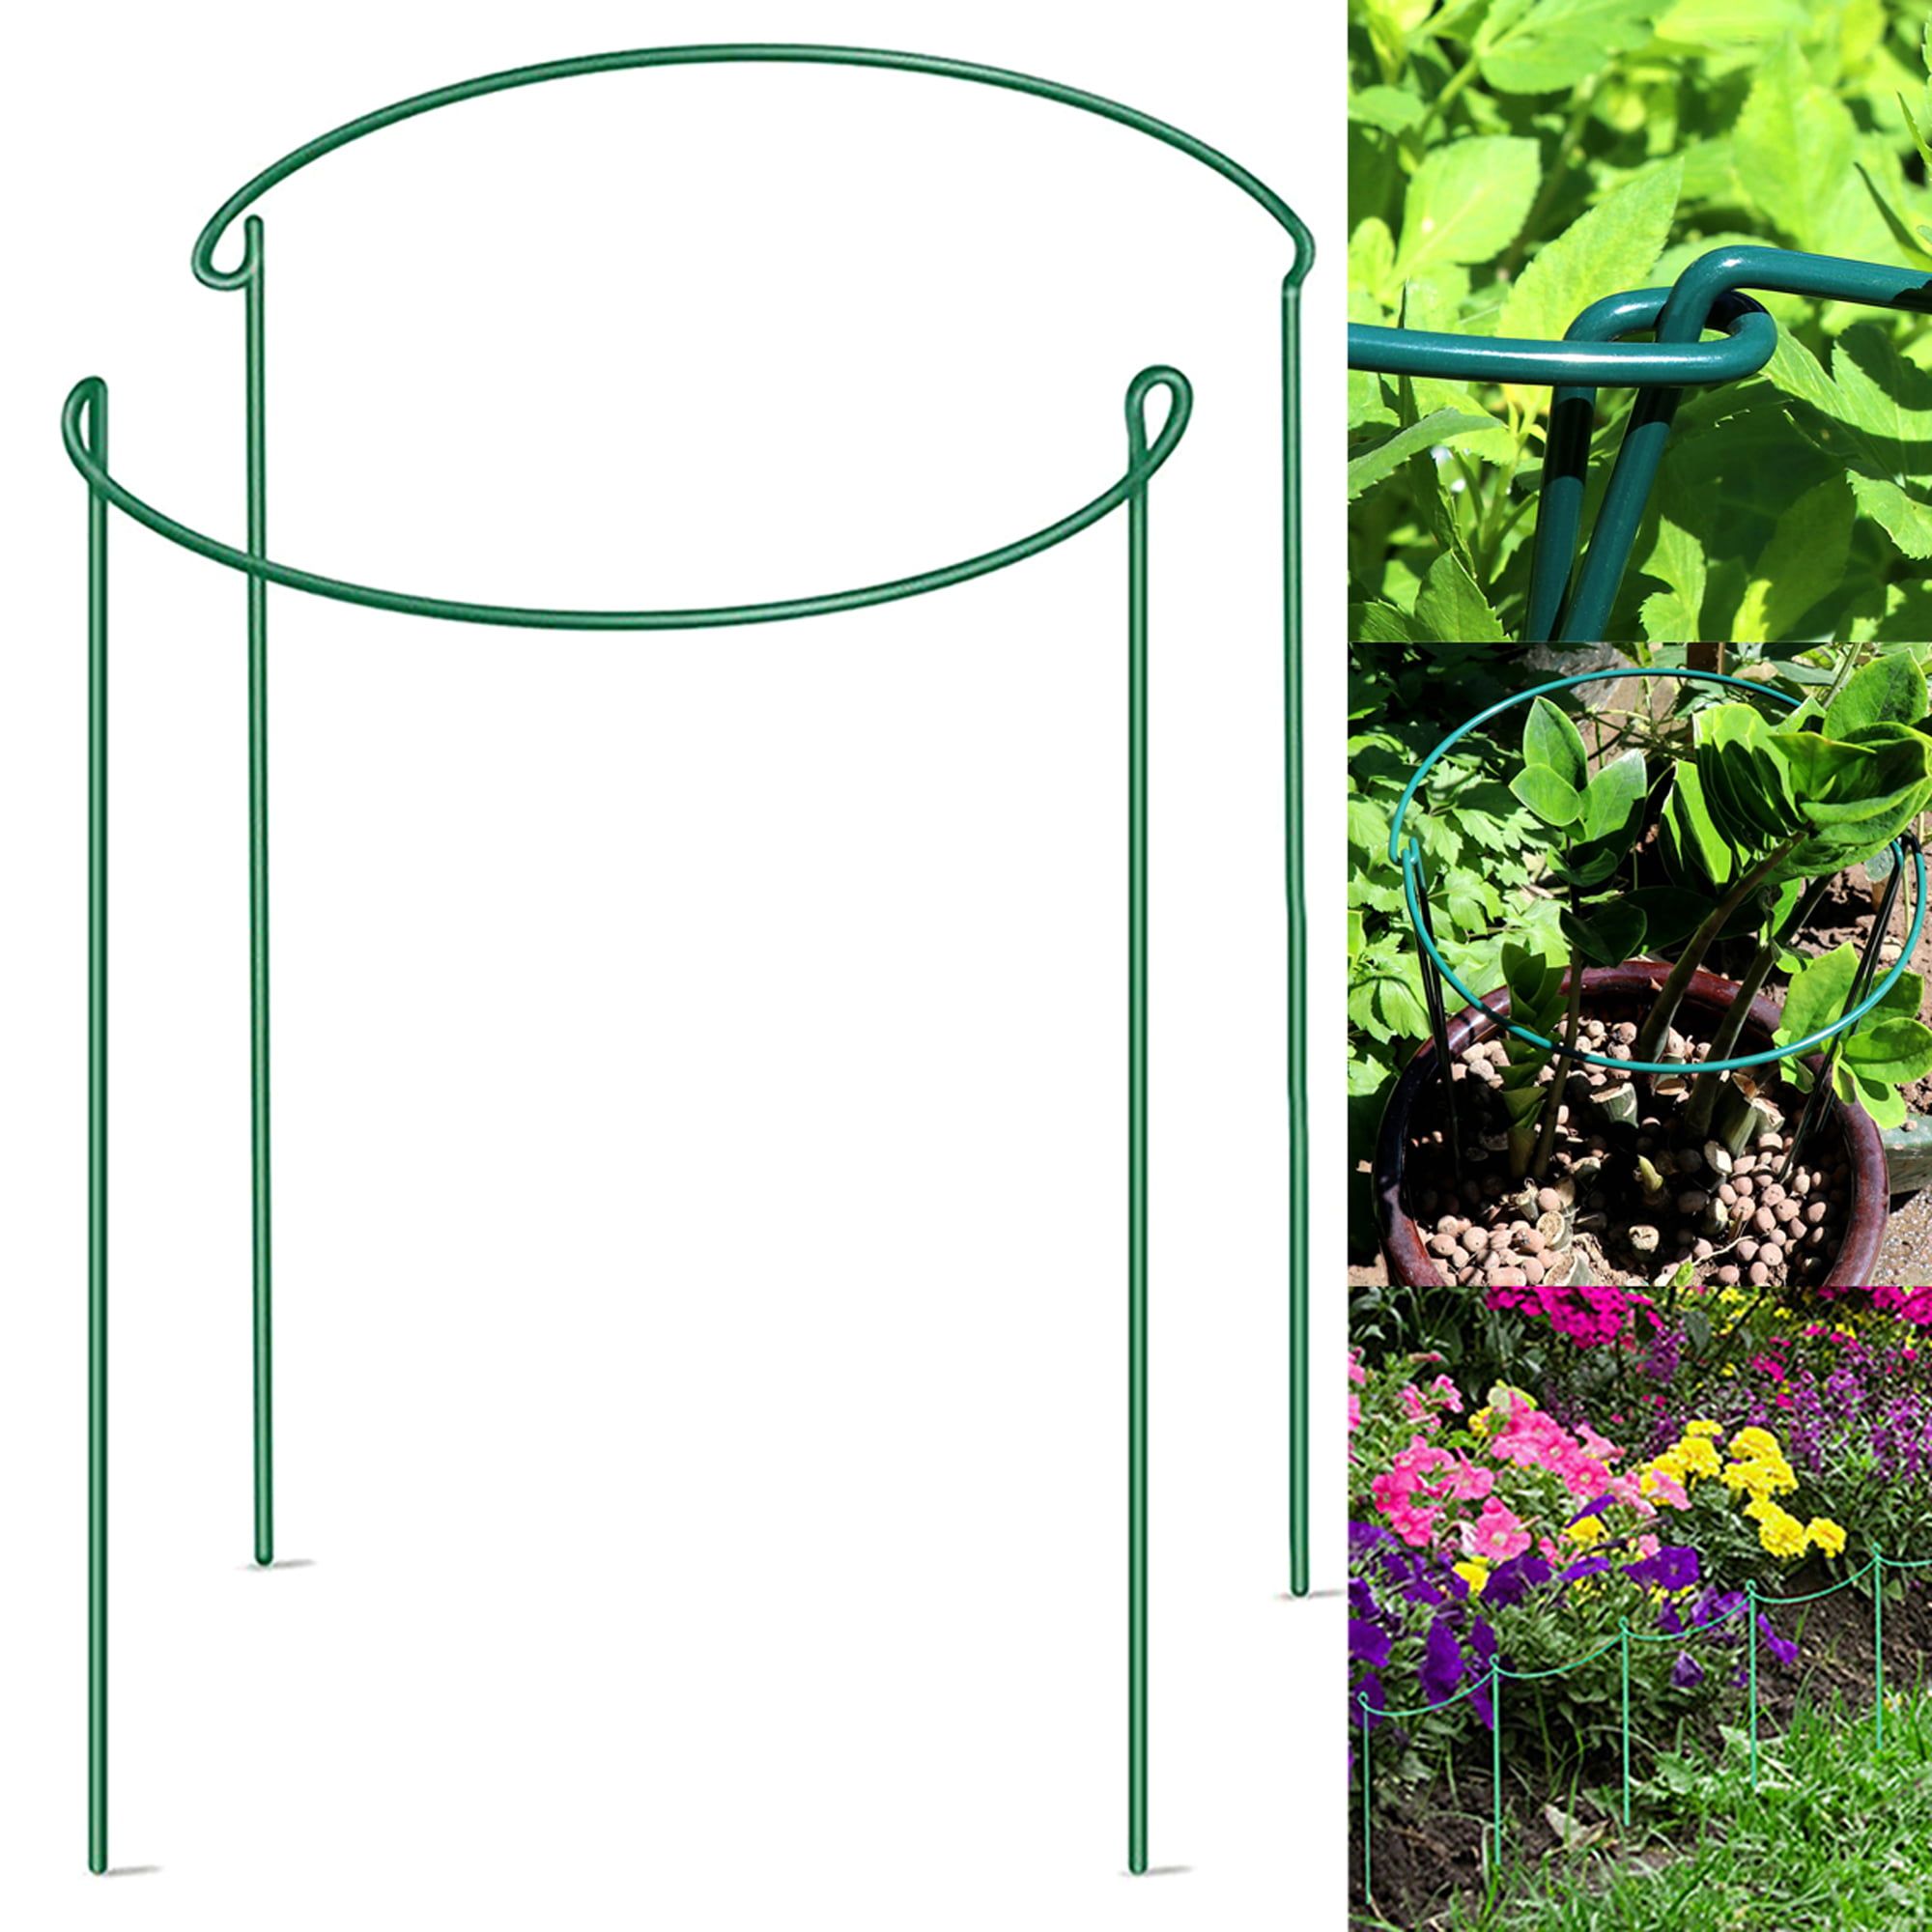 2 Garden Support Stake Metal Climbing Garden Plant Support Ring Border Support 